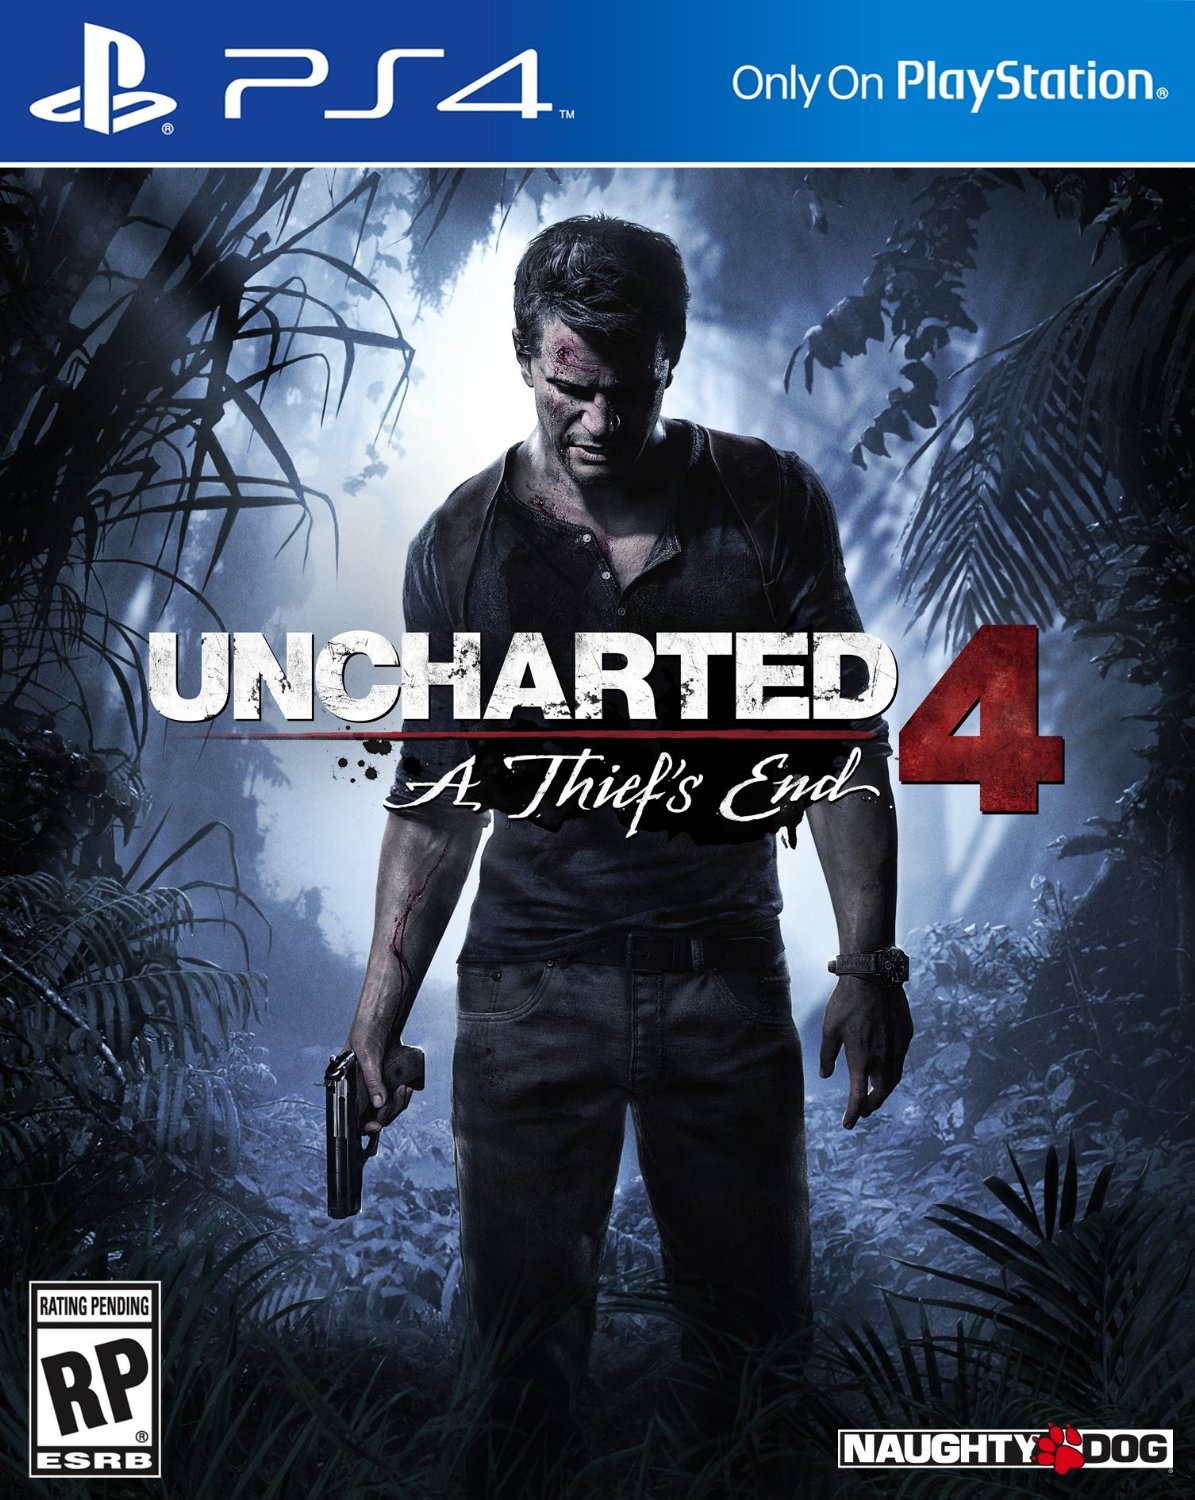 Uncharted_4_A_Thief's_End_cover_art.jpg